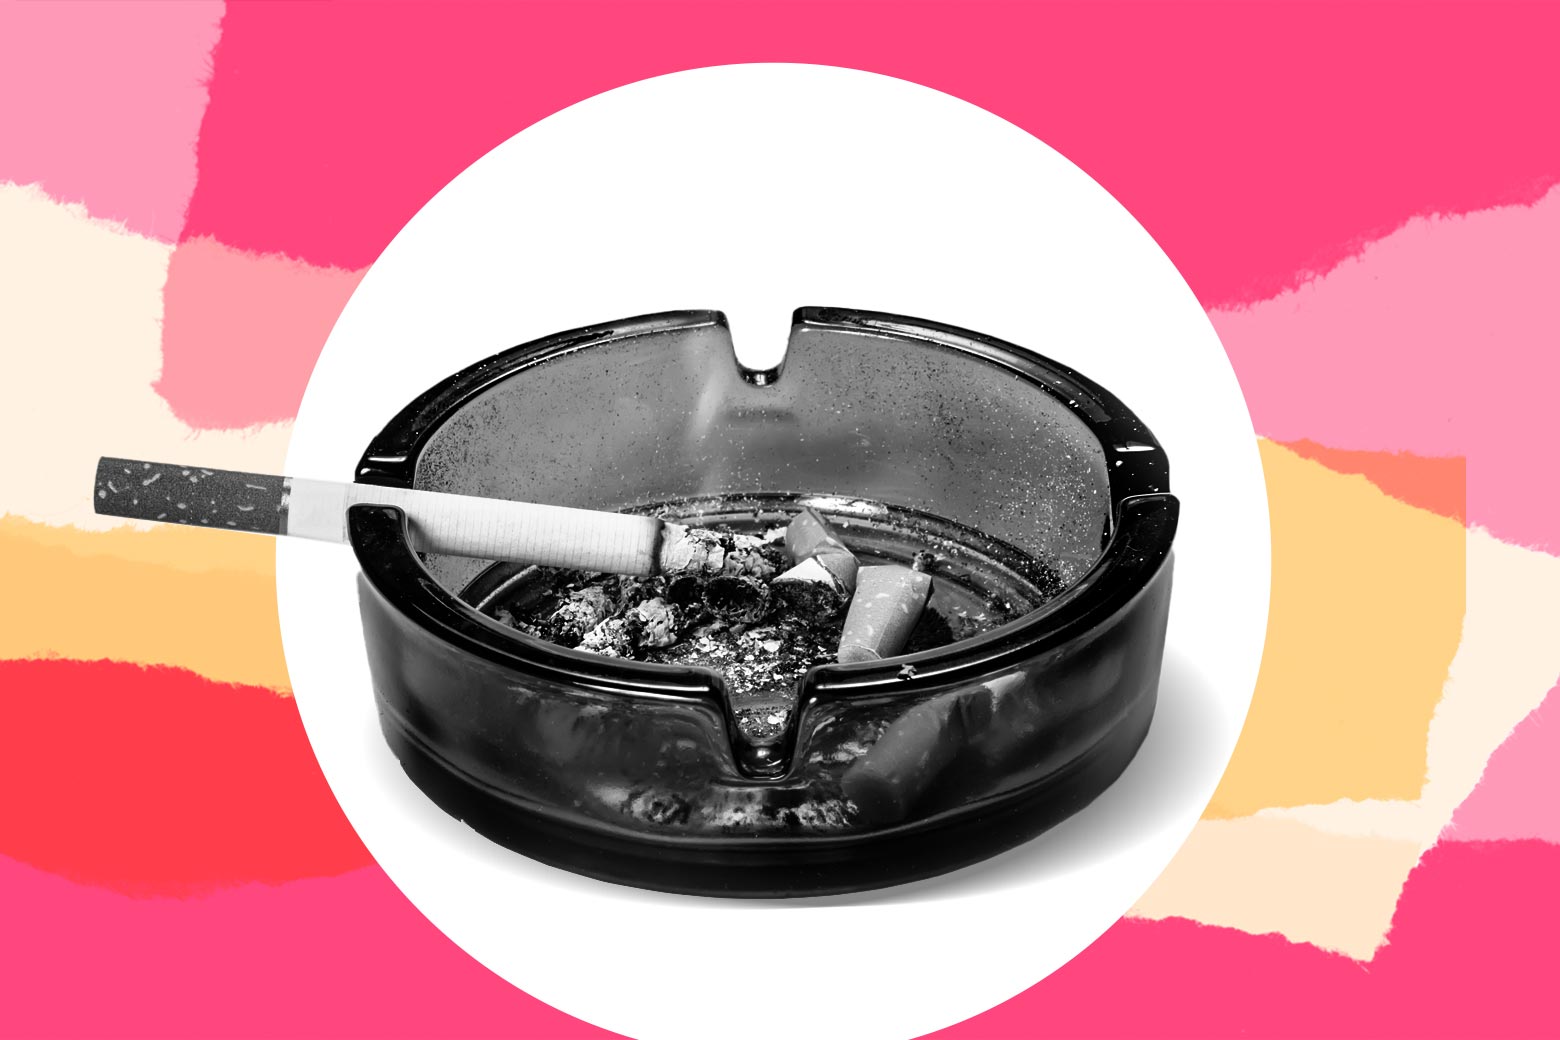 A cigarette laying on an ashtray full of butts